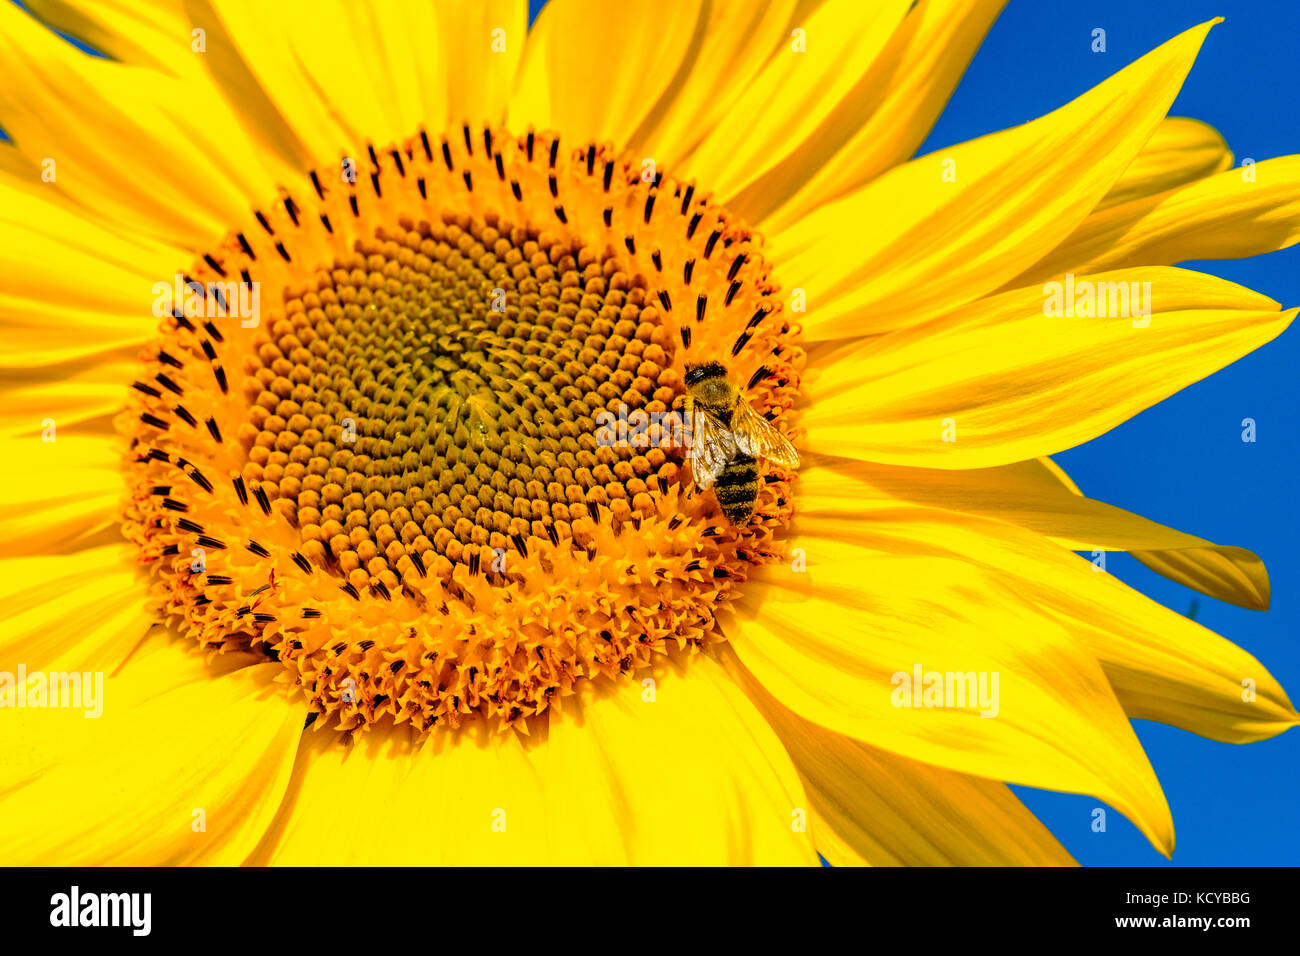 A yellow sunflower (Helianthus annuus) with a honeybee (Apis mellifera carnica) against blue sky Stock Photo